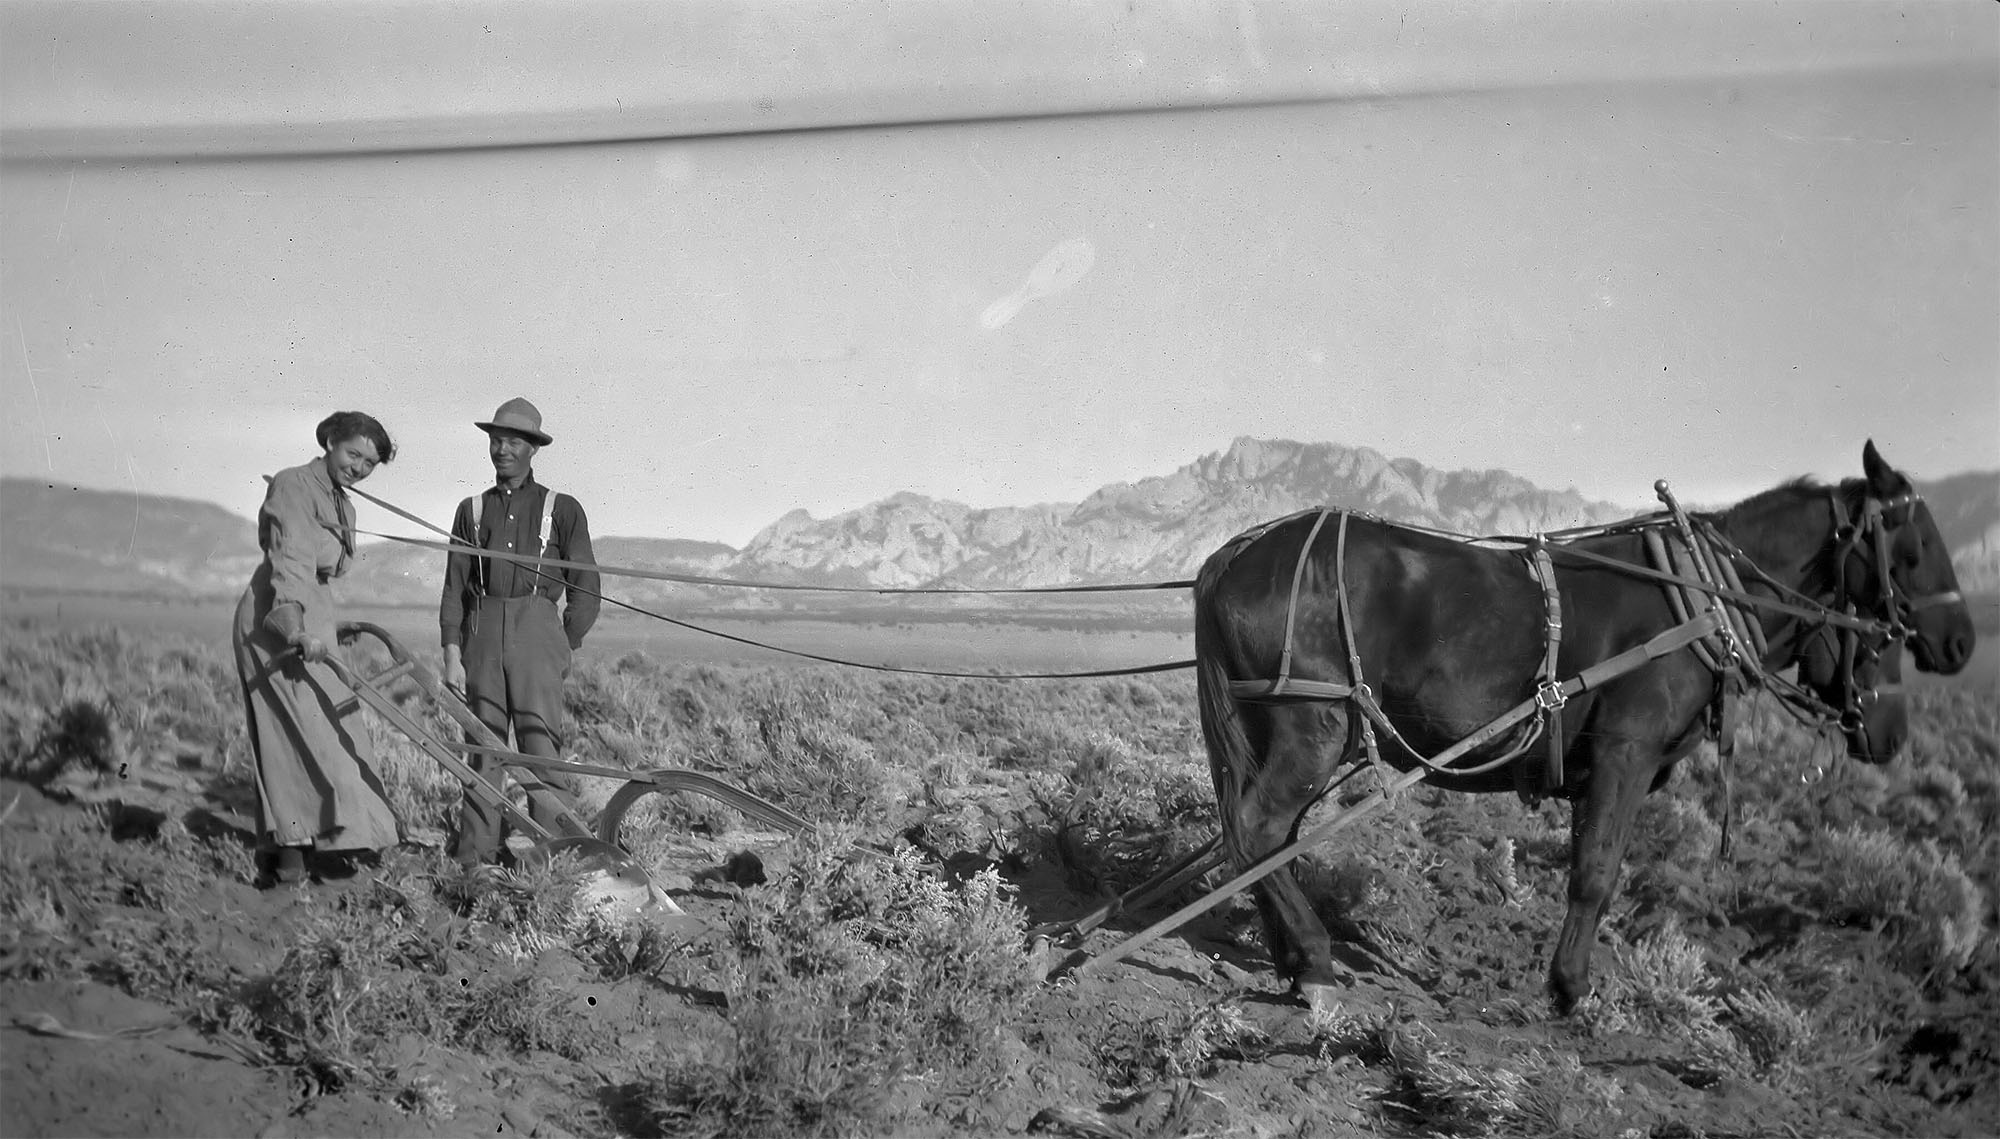 Woman and man plowing sagebrush with horse